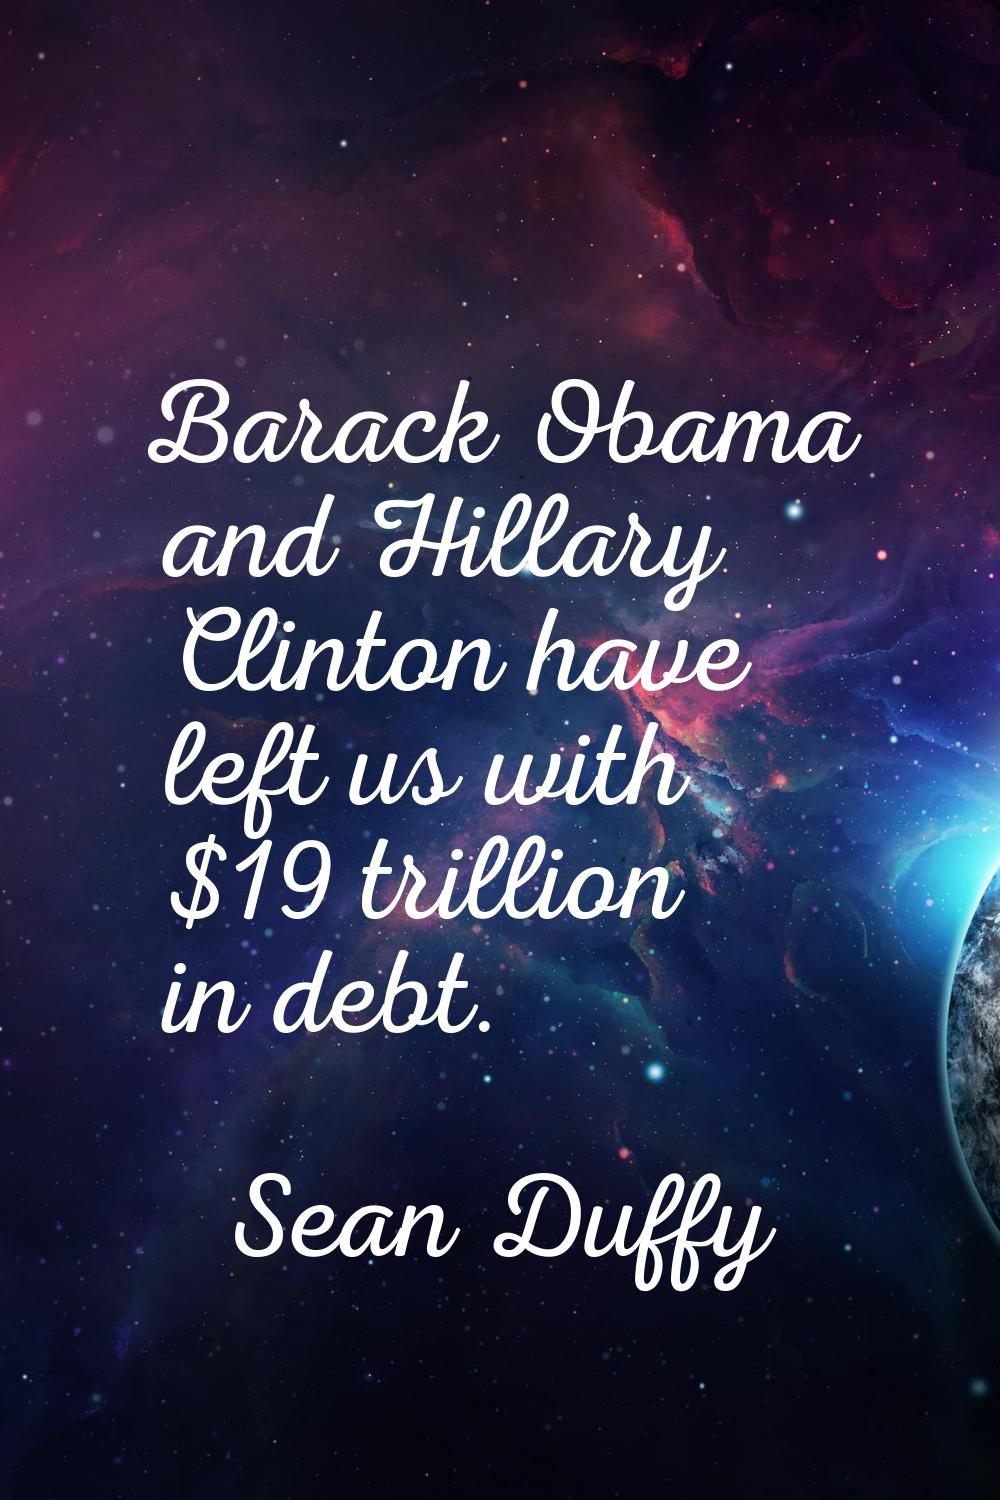 Barack Obama and Hillary Clinton have left us with $19 trillion in debt.